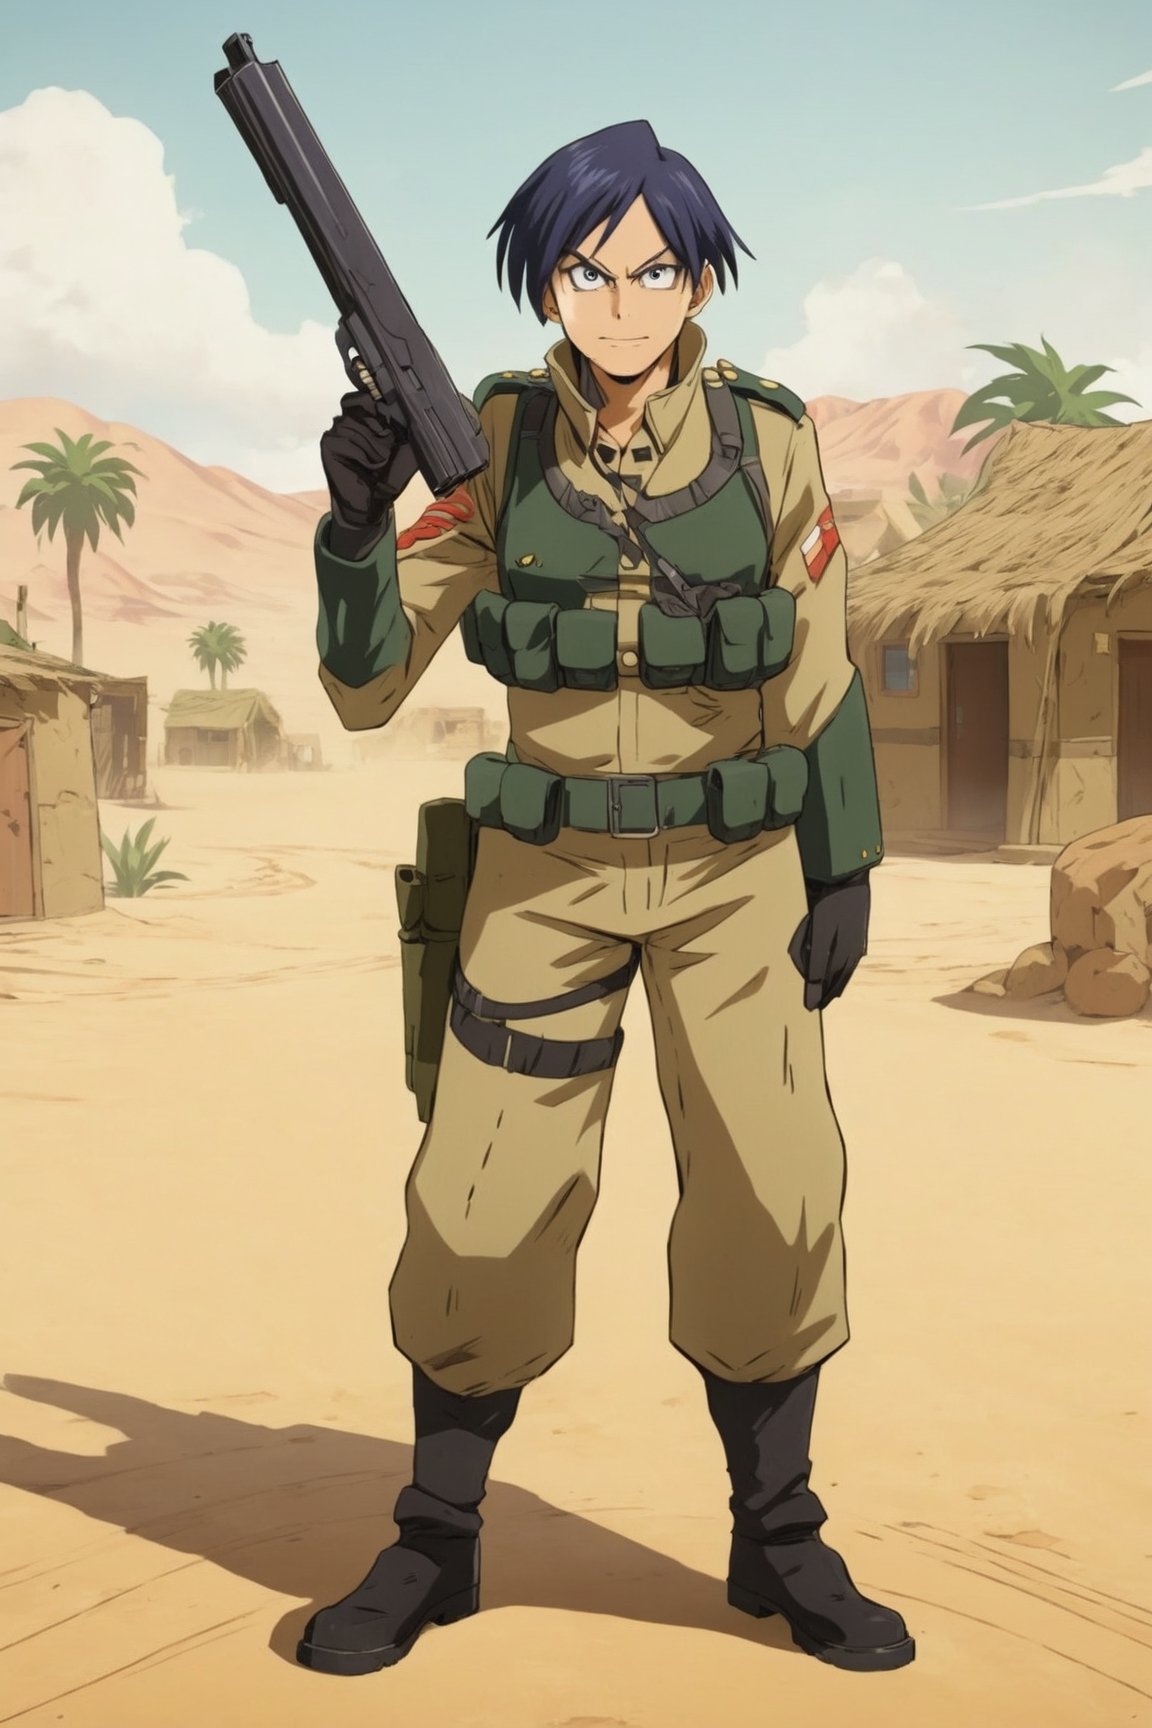 Full body view, tenxiida character, anime style image, wearing a military outfit, holding a gun, in a desert village